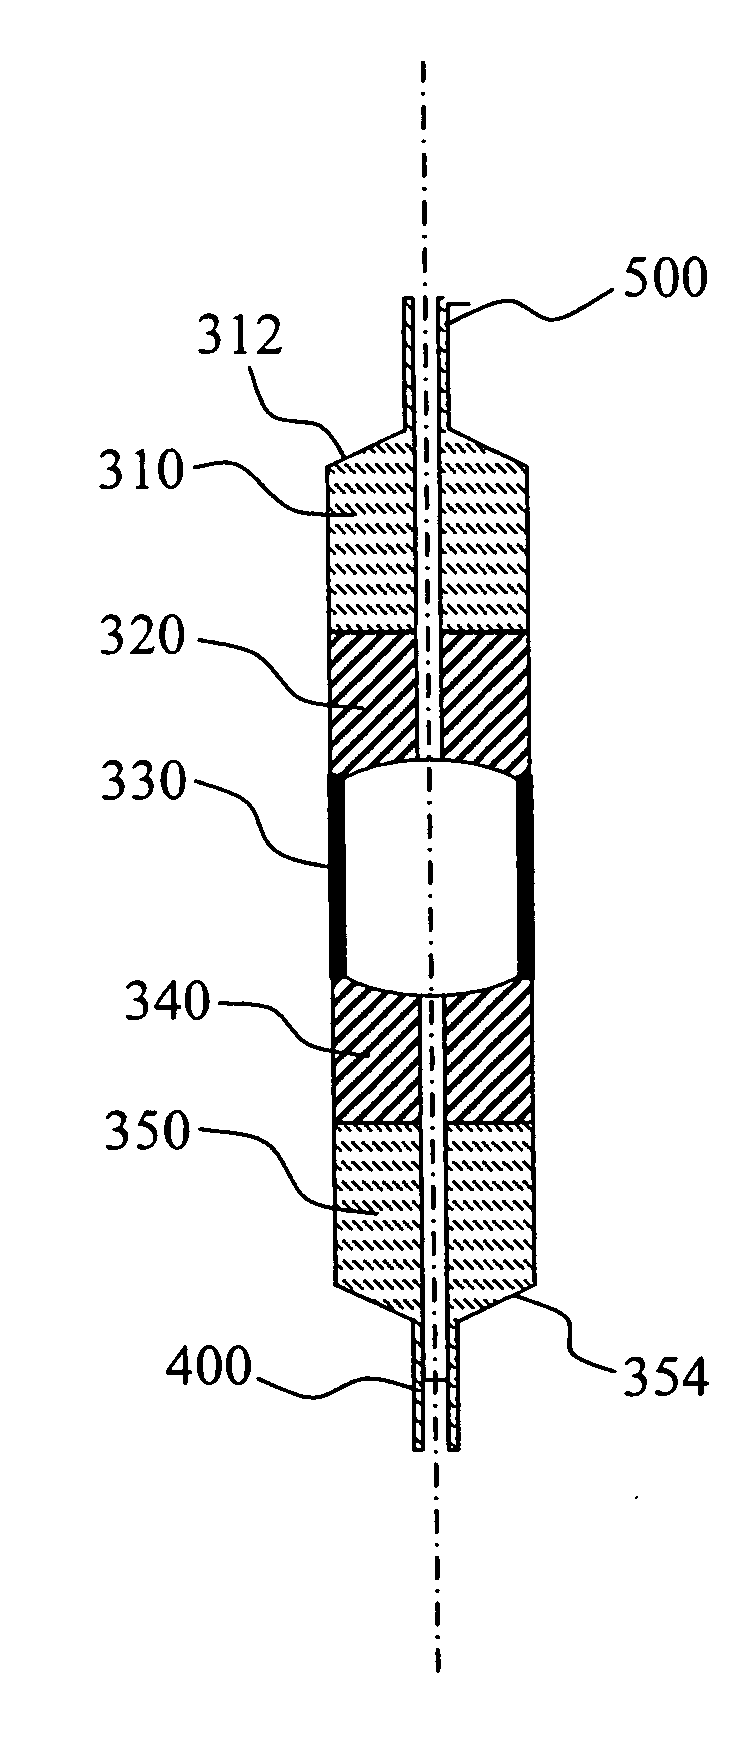 Apparatus of nuclear magnetic resonance measurement for continuous sample injection